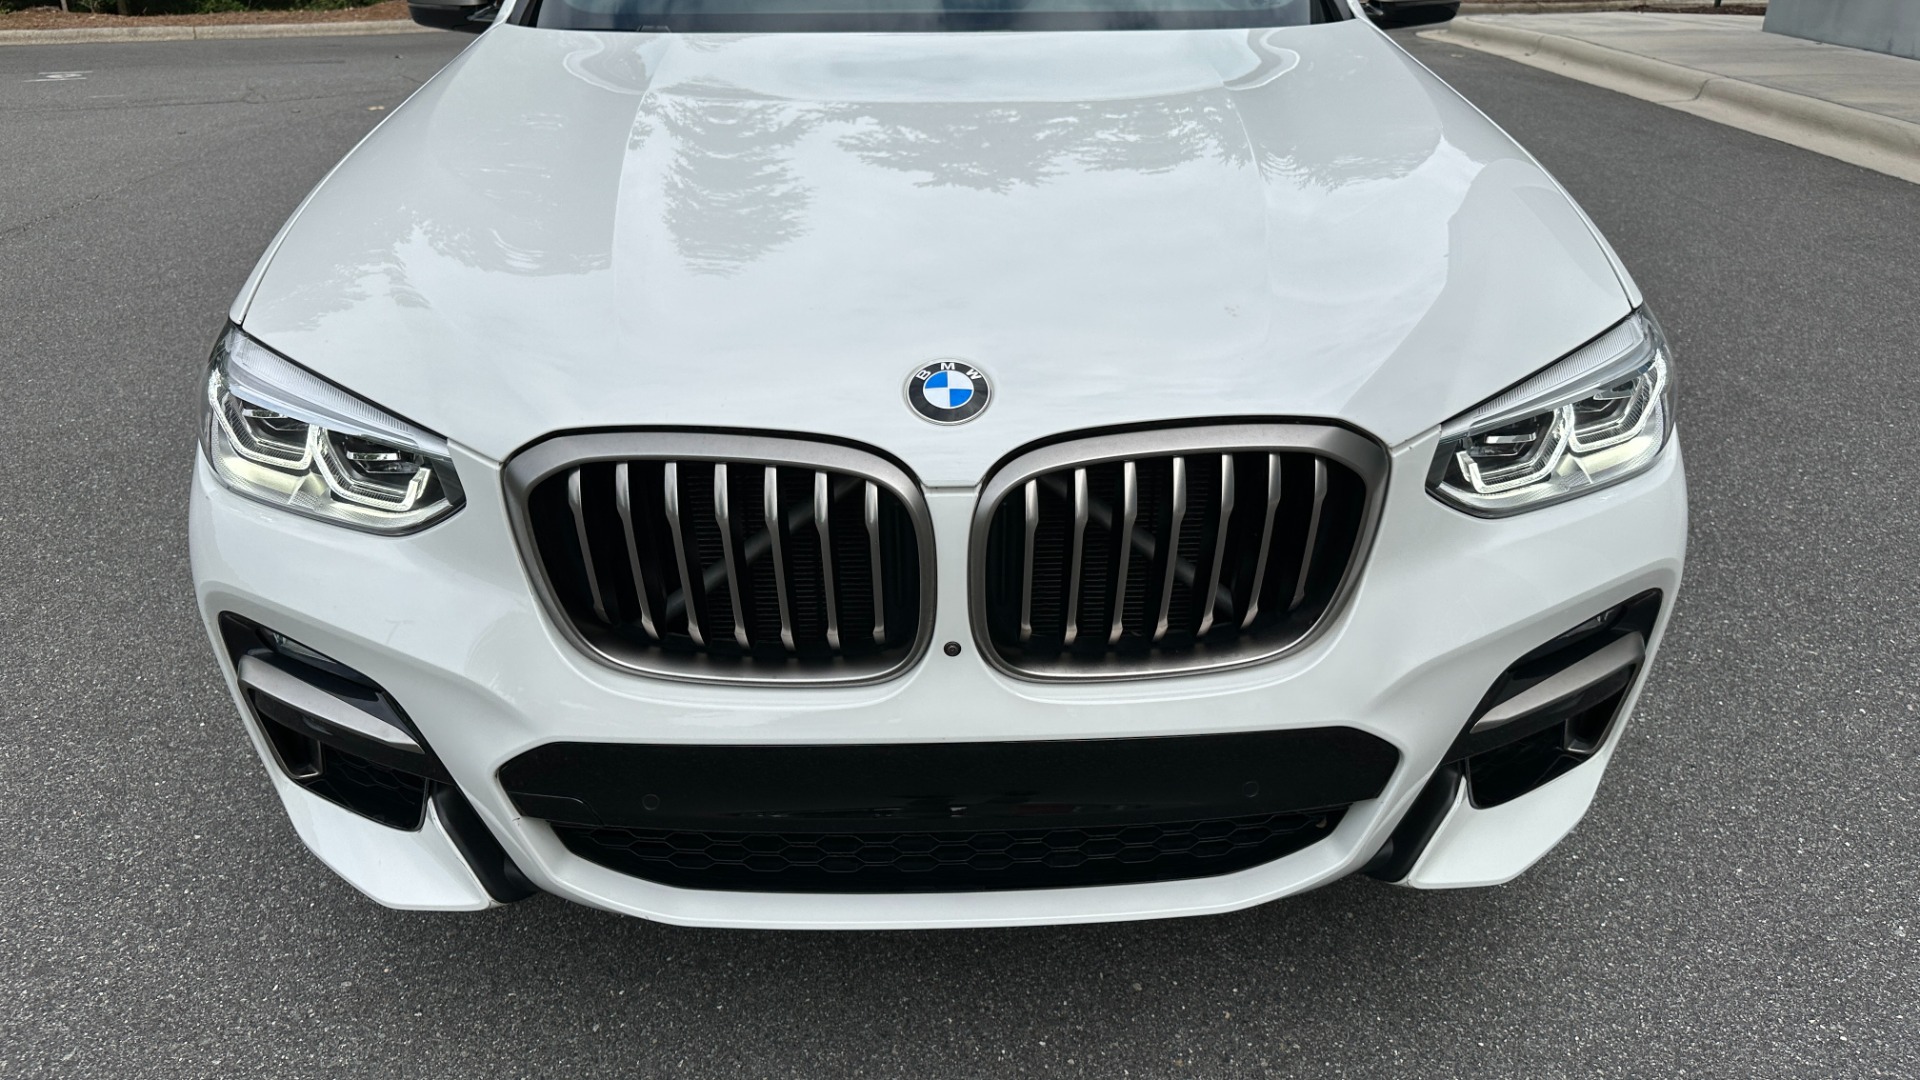 Used 2020 BMW X3 M40i / DRIVER ASSIST / EXECUTIVE PACKAGE / HK SOUND / AMBIENT LIGHT for sale $40,995 at Formula Imports in Charlotte NC 28227 8